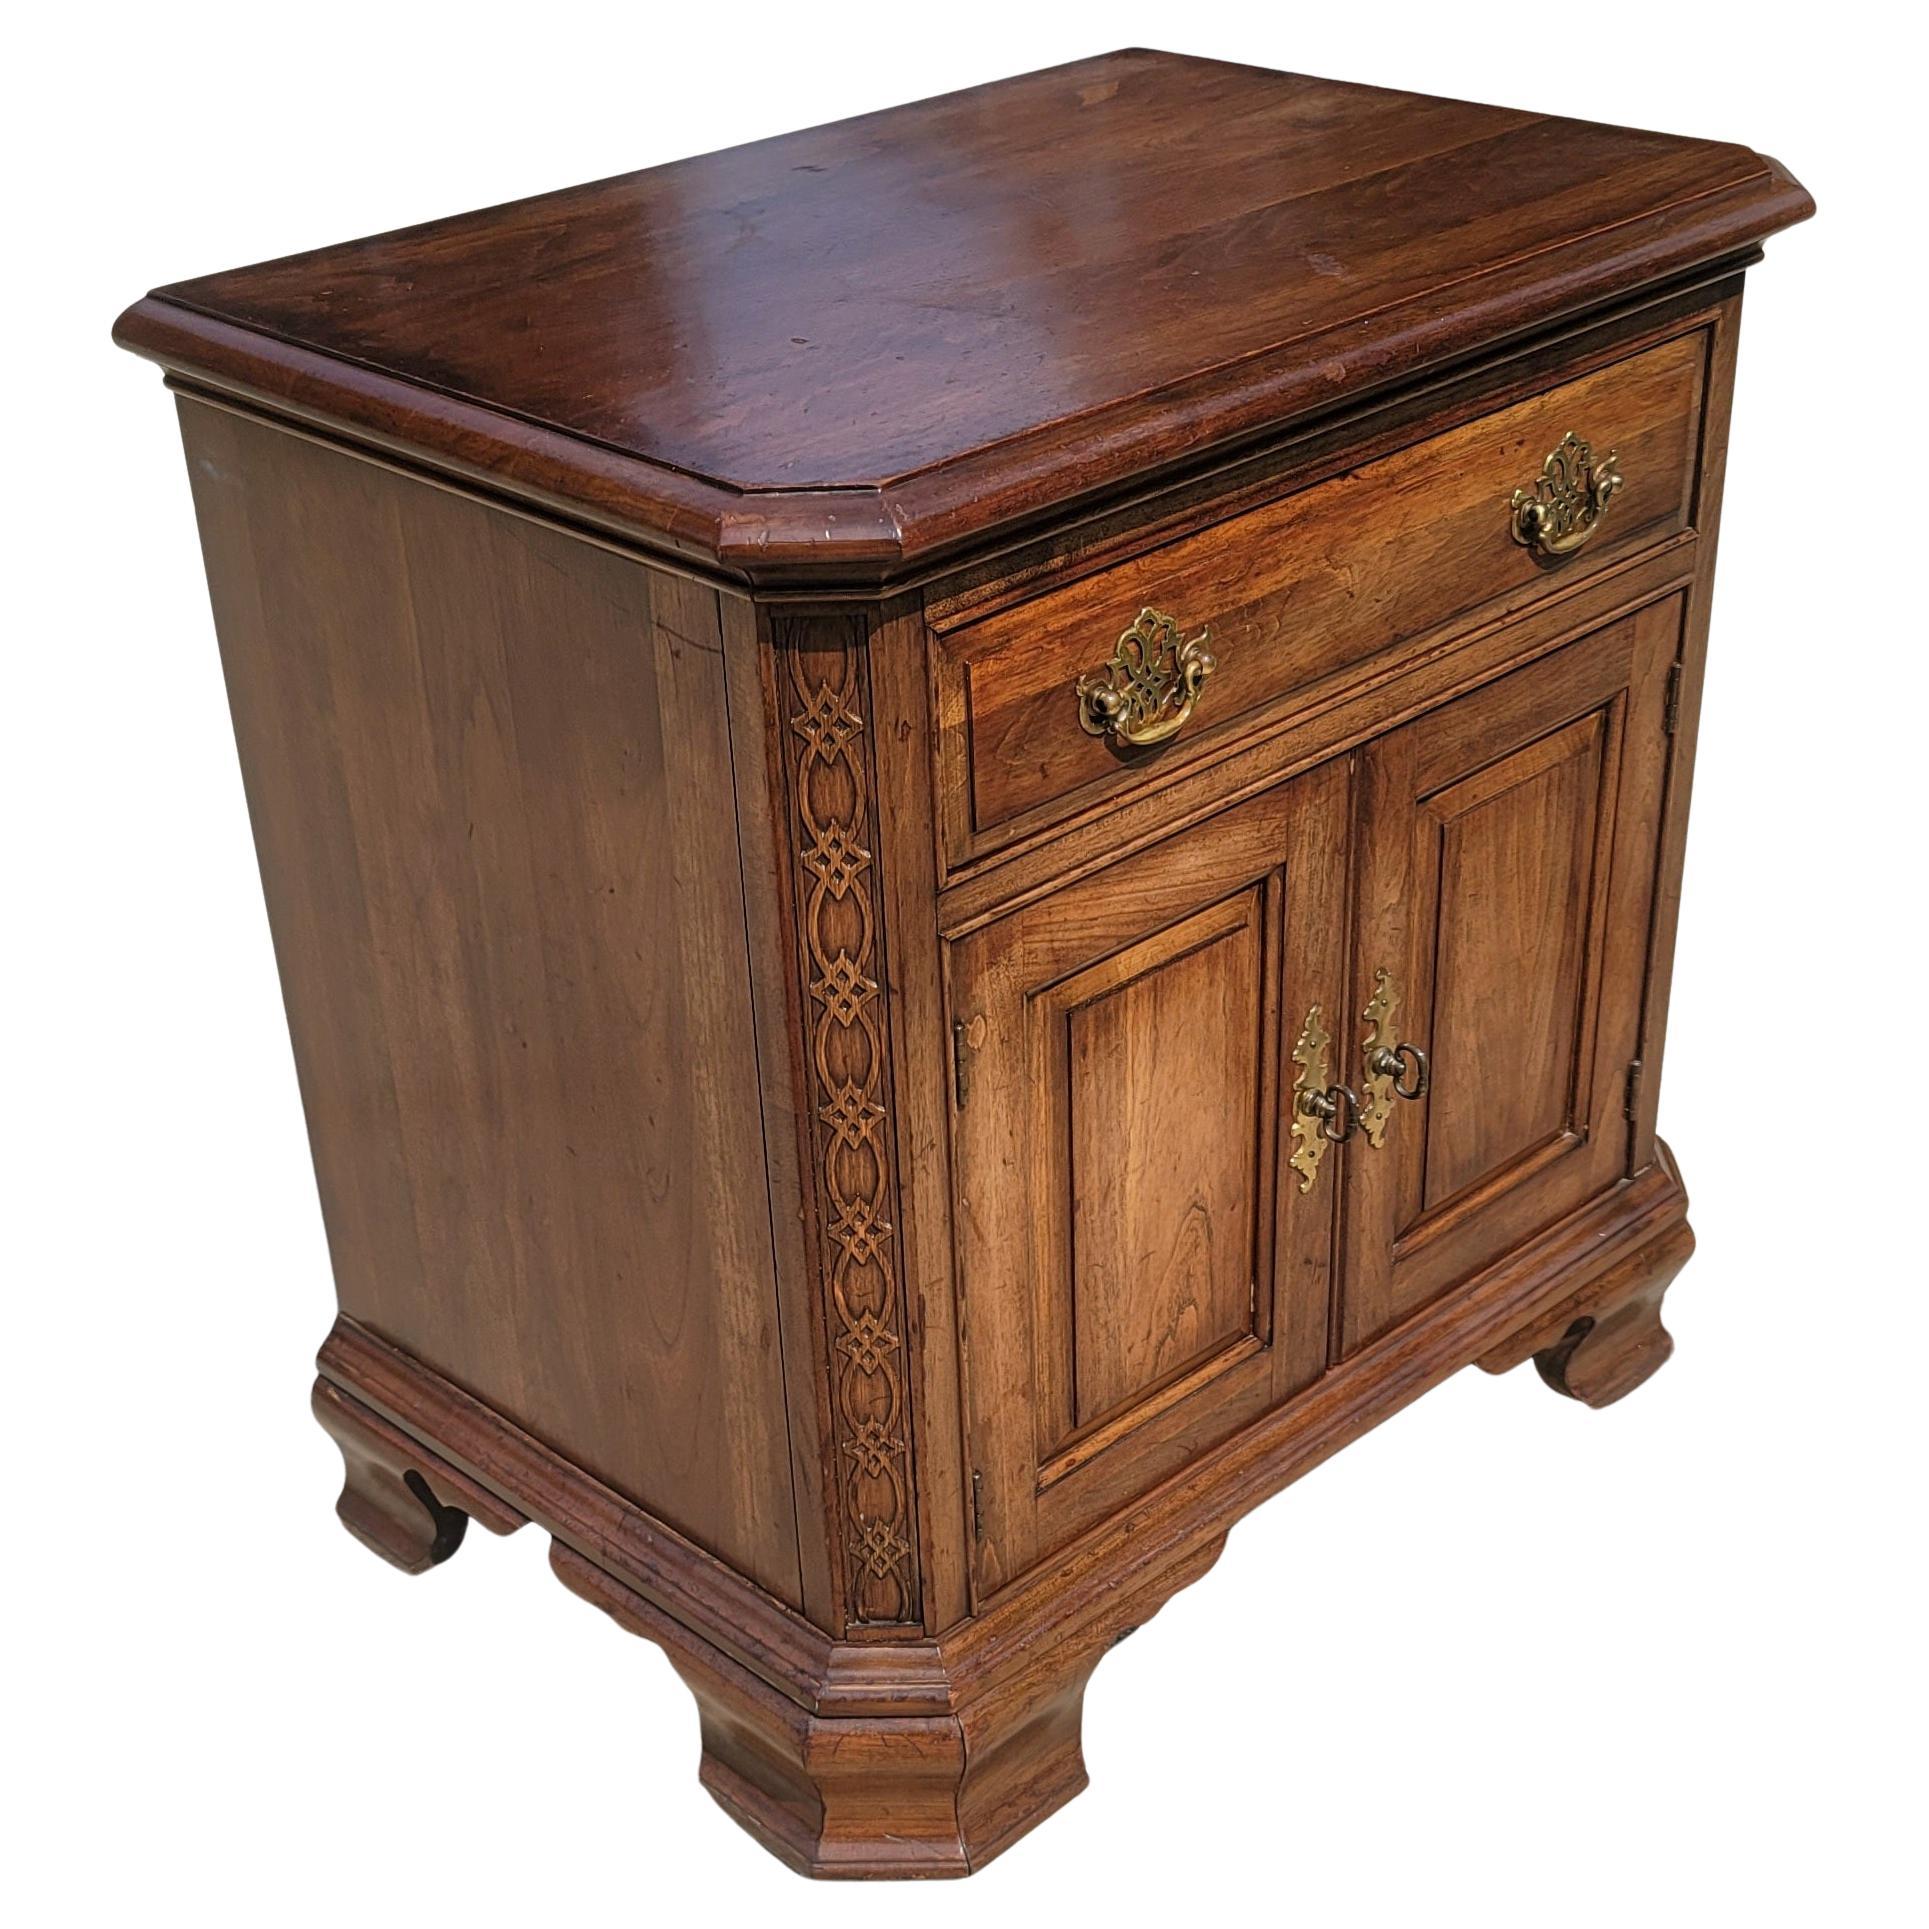 1980s Pennsylvania House Solid Cherry bedside table nighstand with sides fretwork with top dovetailed drawers and rommy bottom double door cabinet.
Measures: 24 inches in width, 16.25